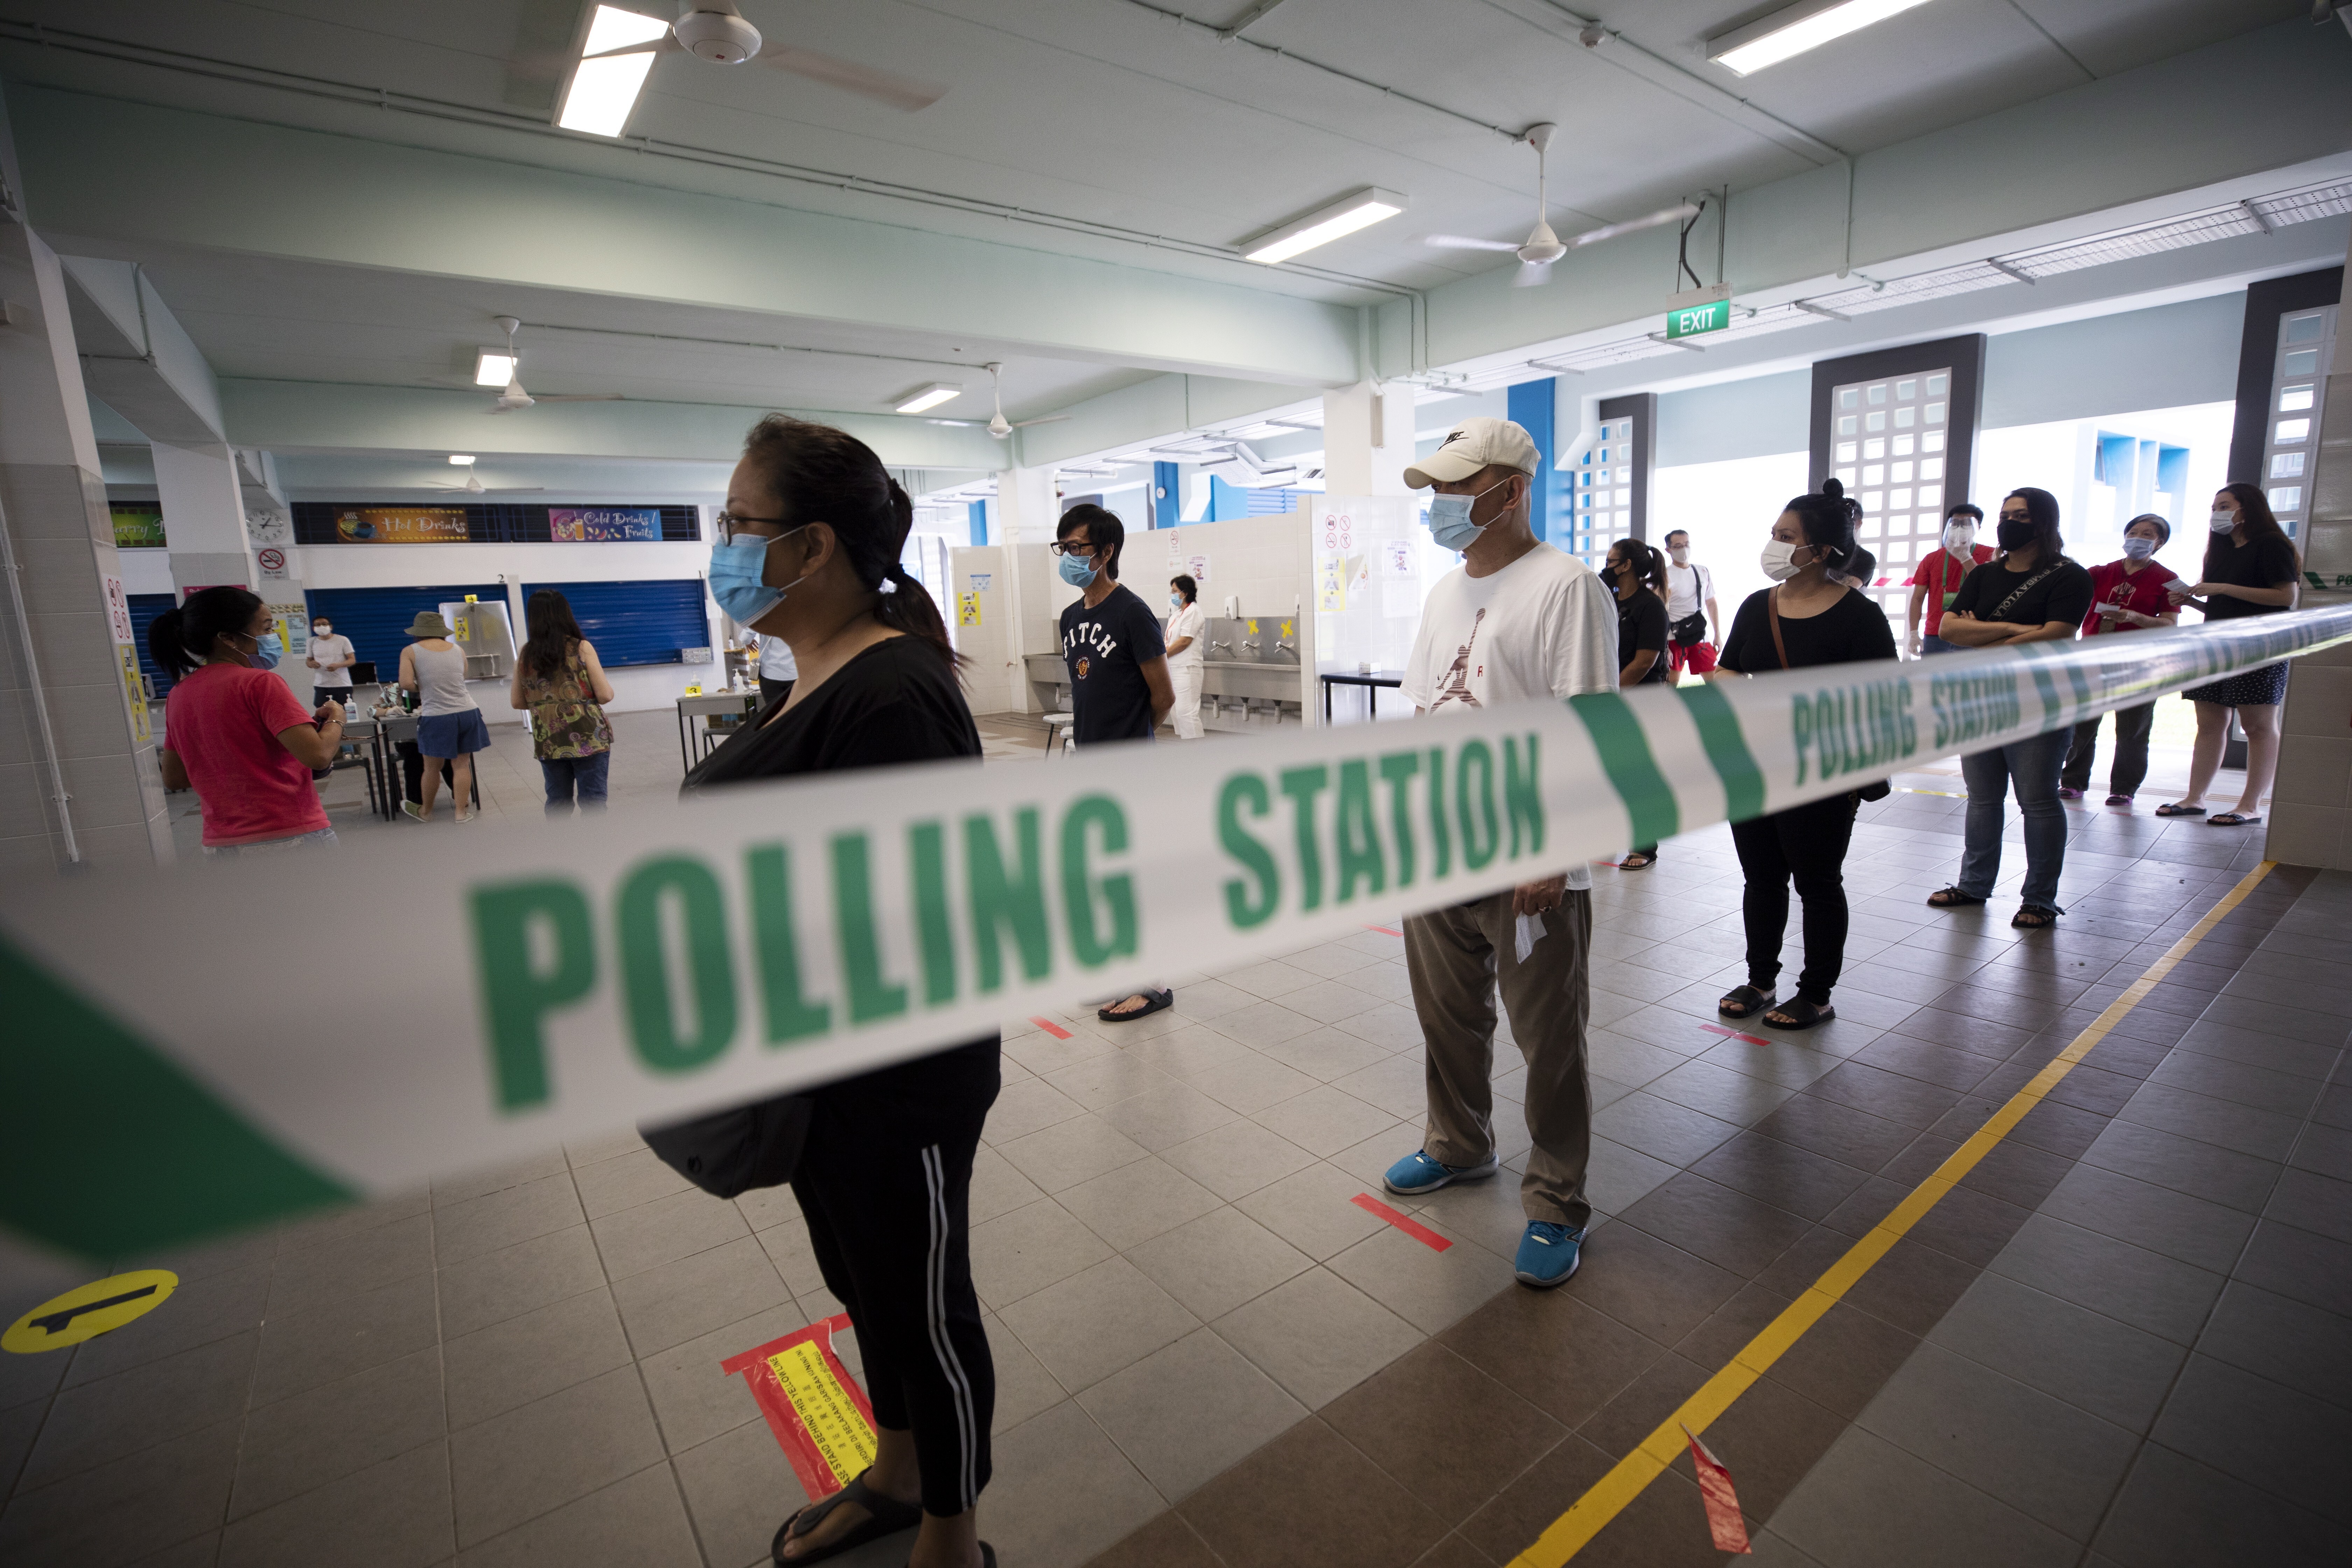 Voters queue to cast their ballots at a polling station in Singapore. Photo: EPA